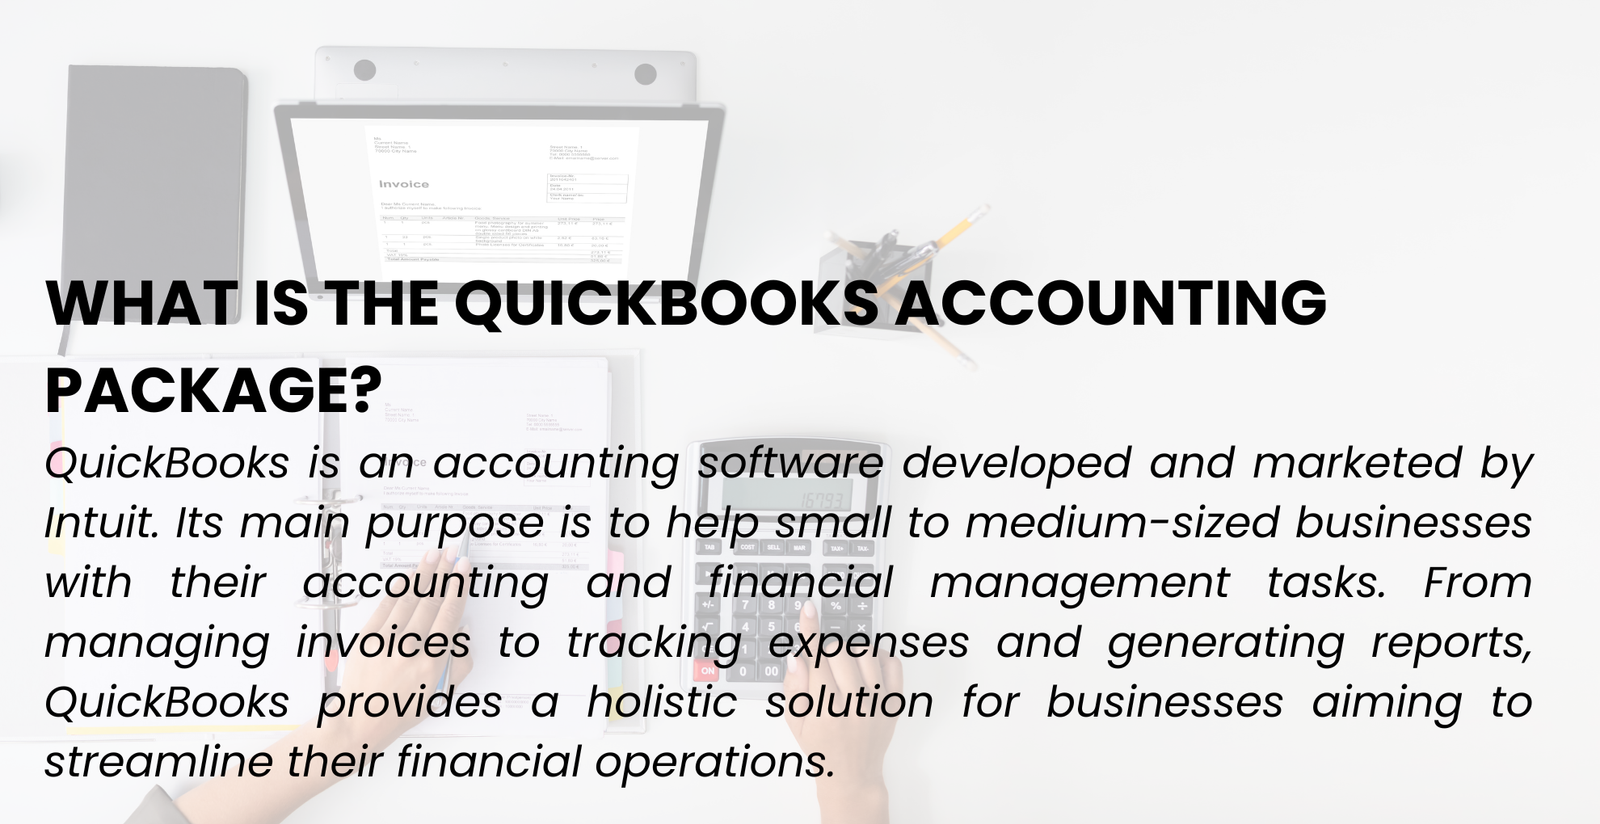 Quickbooks Accounting Package